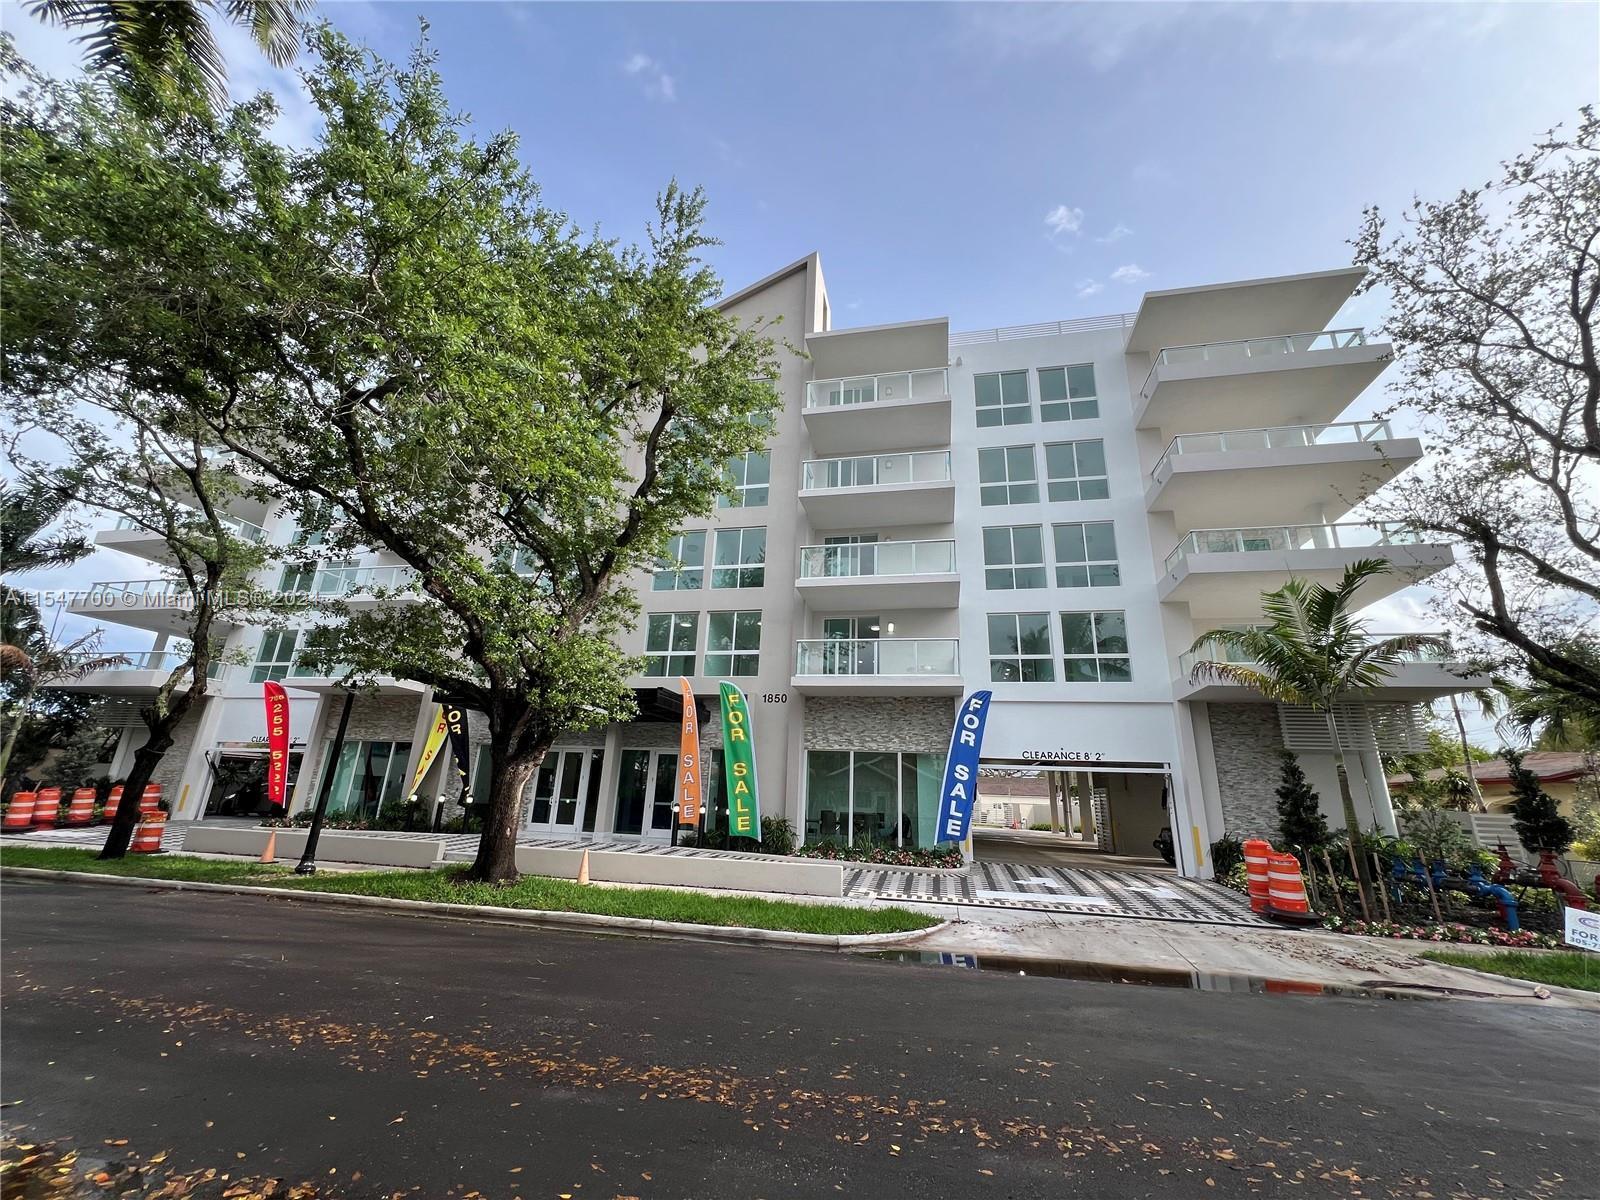 Photo of 1850 Monroe St #205 in Hollywood, FL